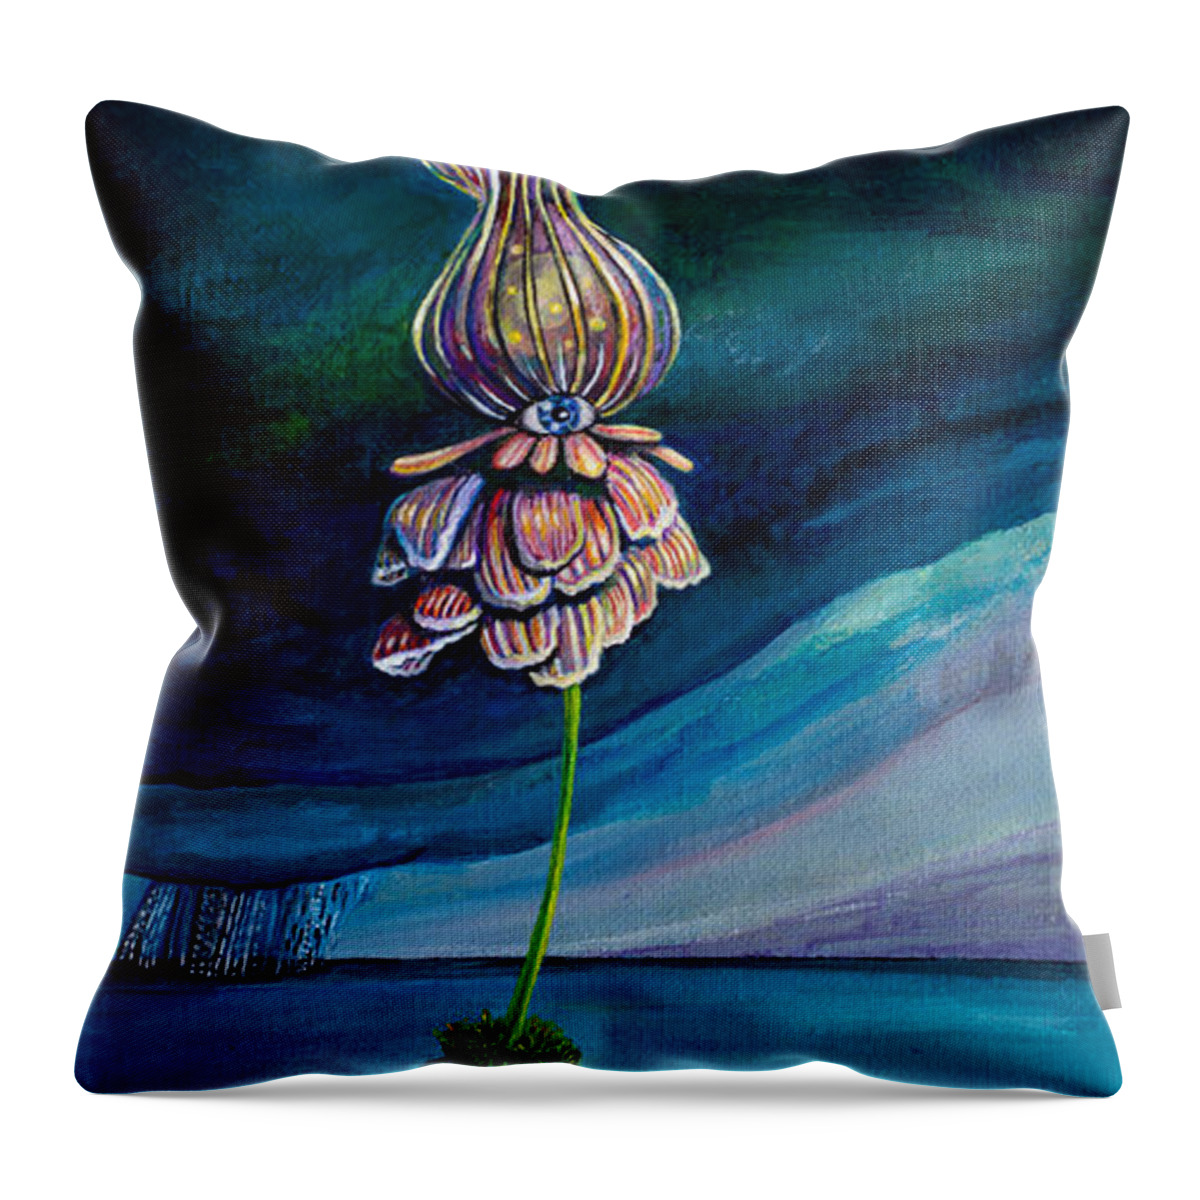 Optimism Throw Pillow featuring the painting Shine Bright by Mindy Huntress